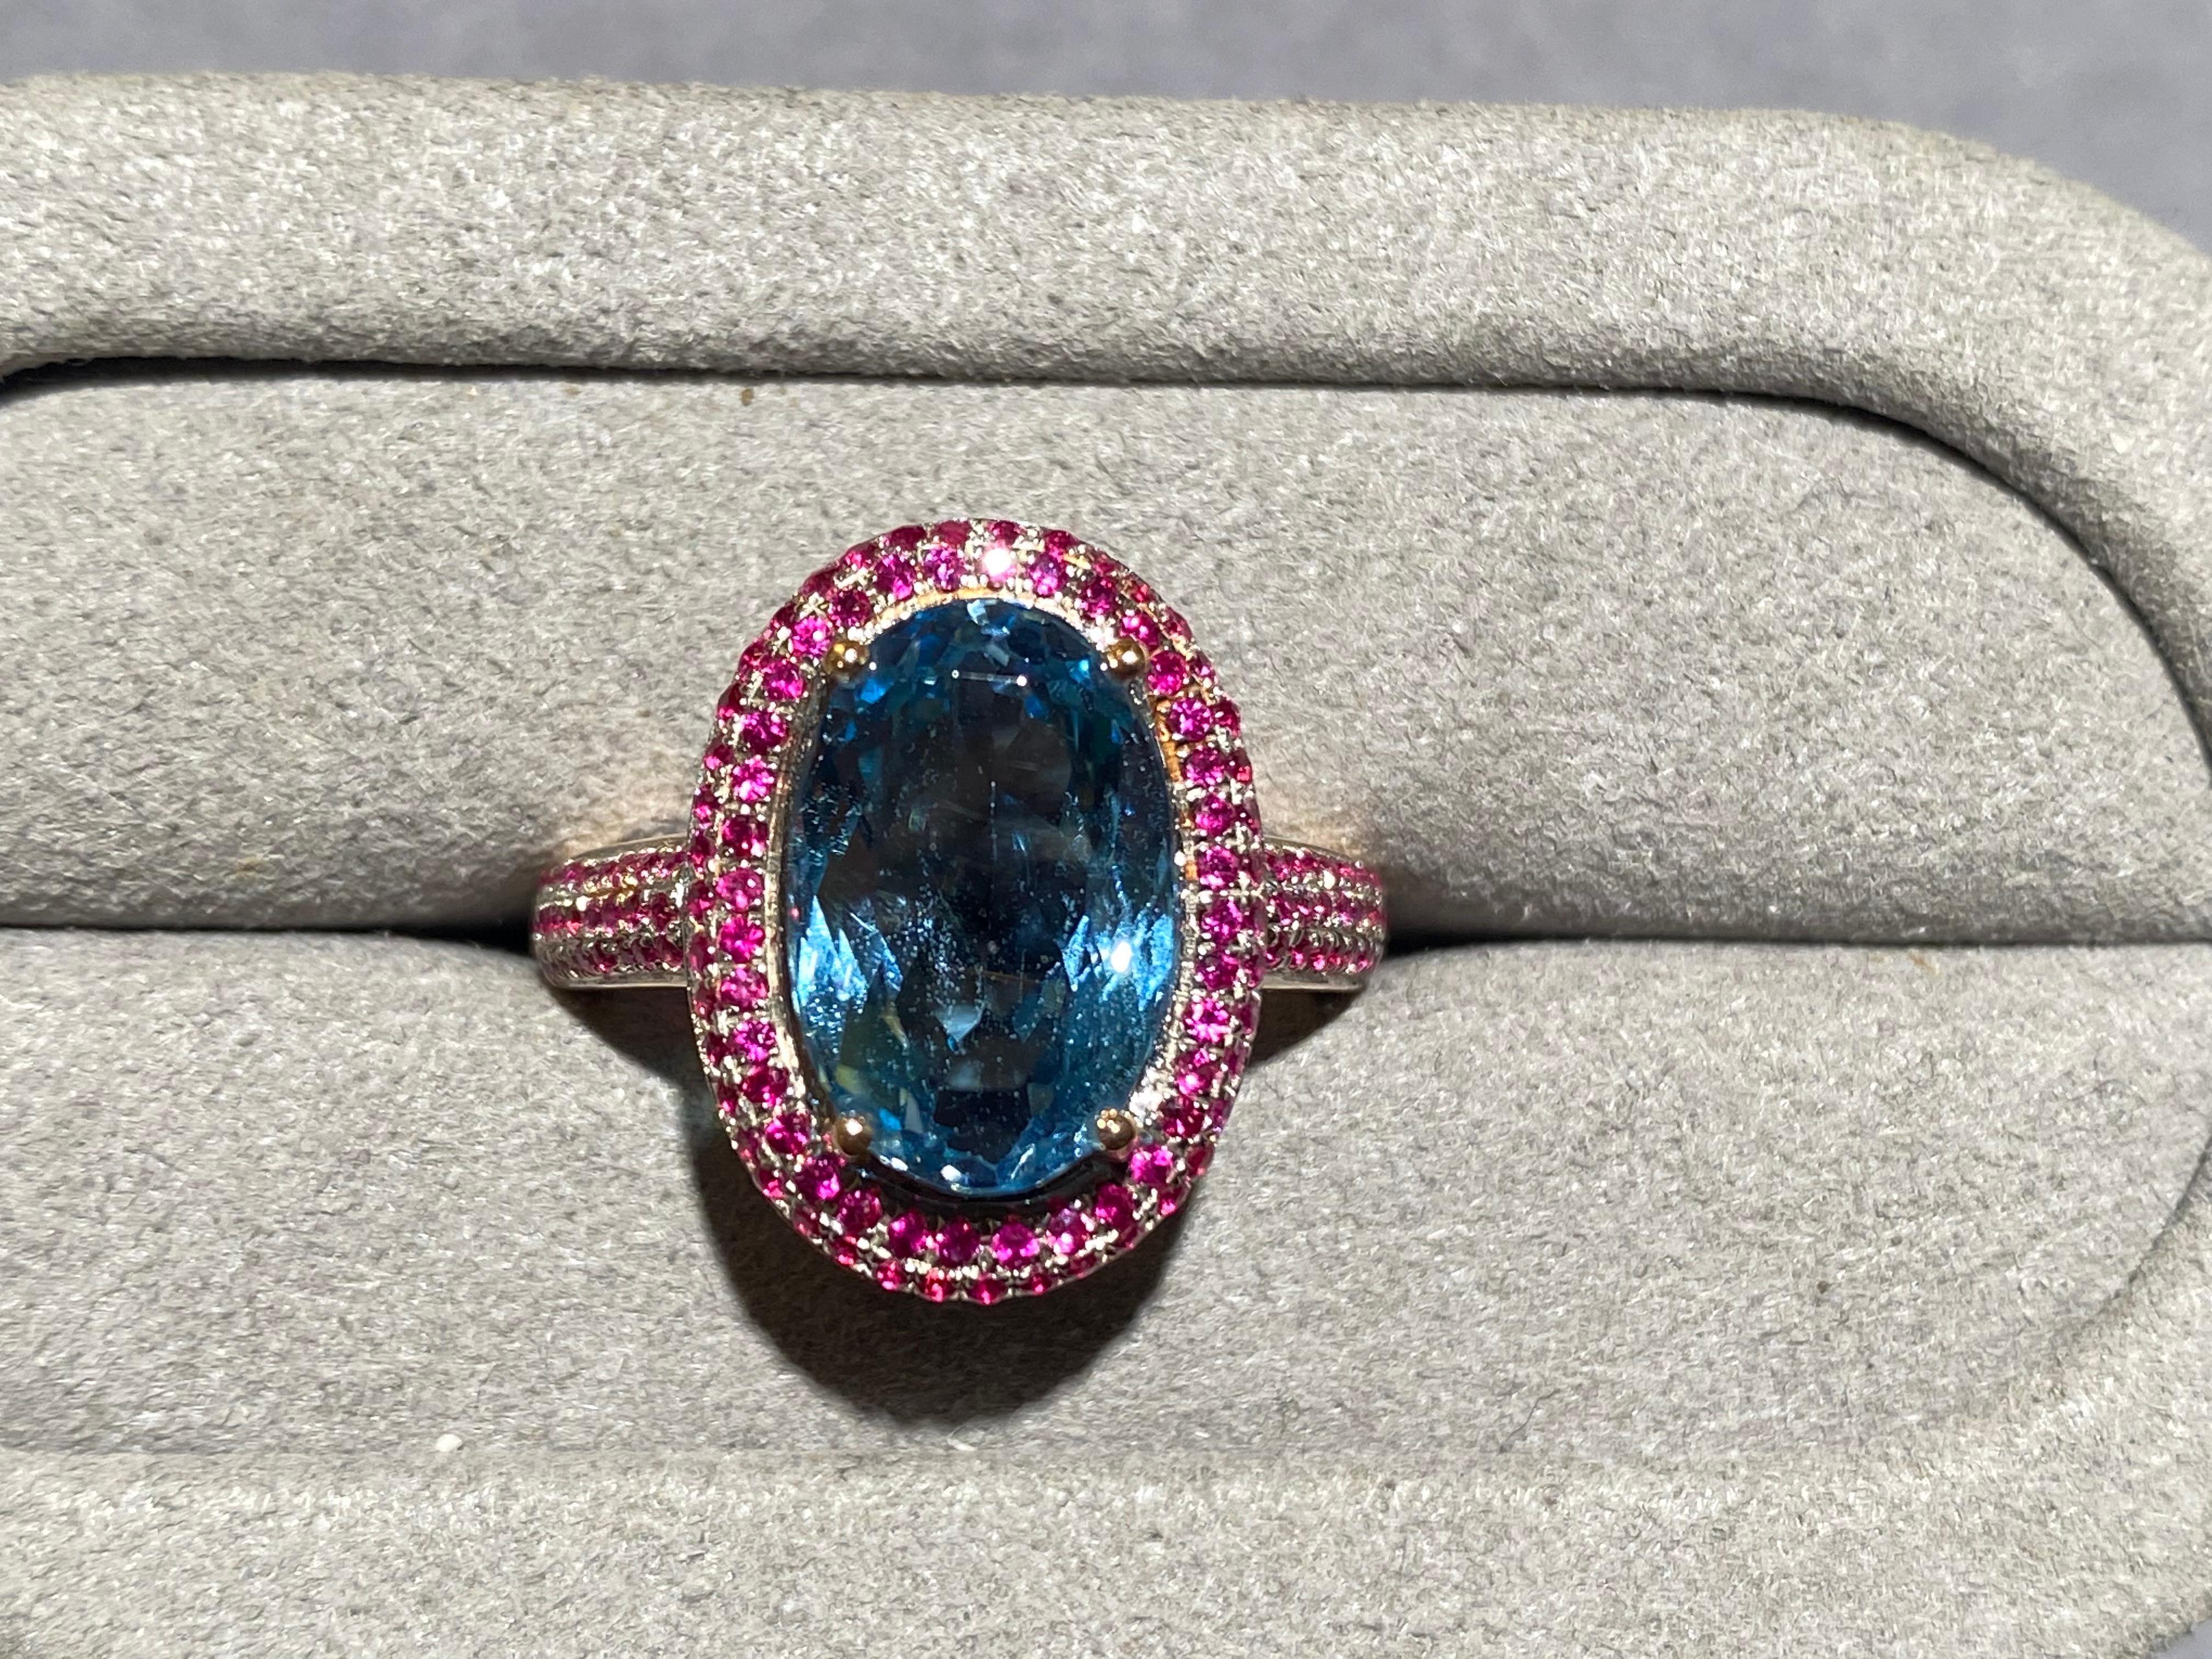 A Vivid blue aquamarine and ruby ring in 18k rose gold. It is an oval shape cut aquamarine surrounded by micro ruby pave. Half of the ring band is also set with micro rubies. This is a very bold choice of colour as vivid blue and vivid red they